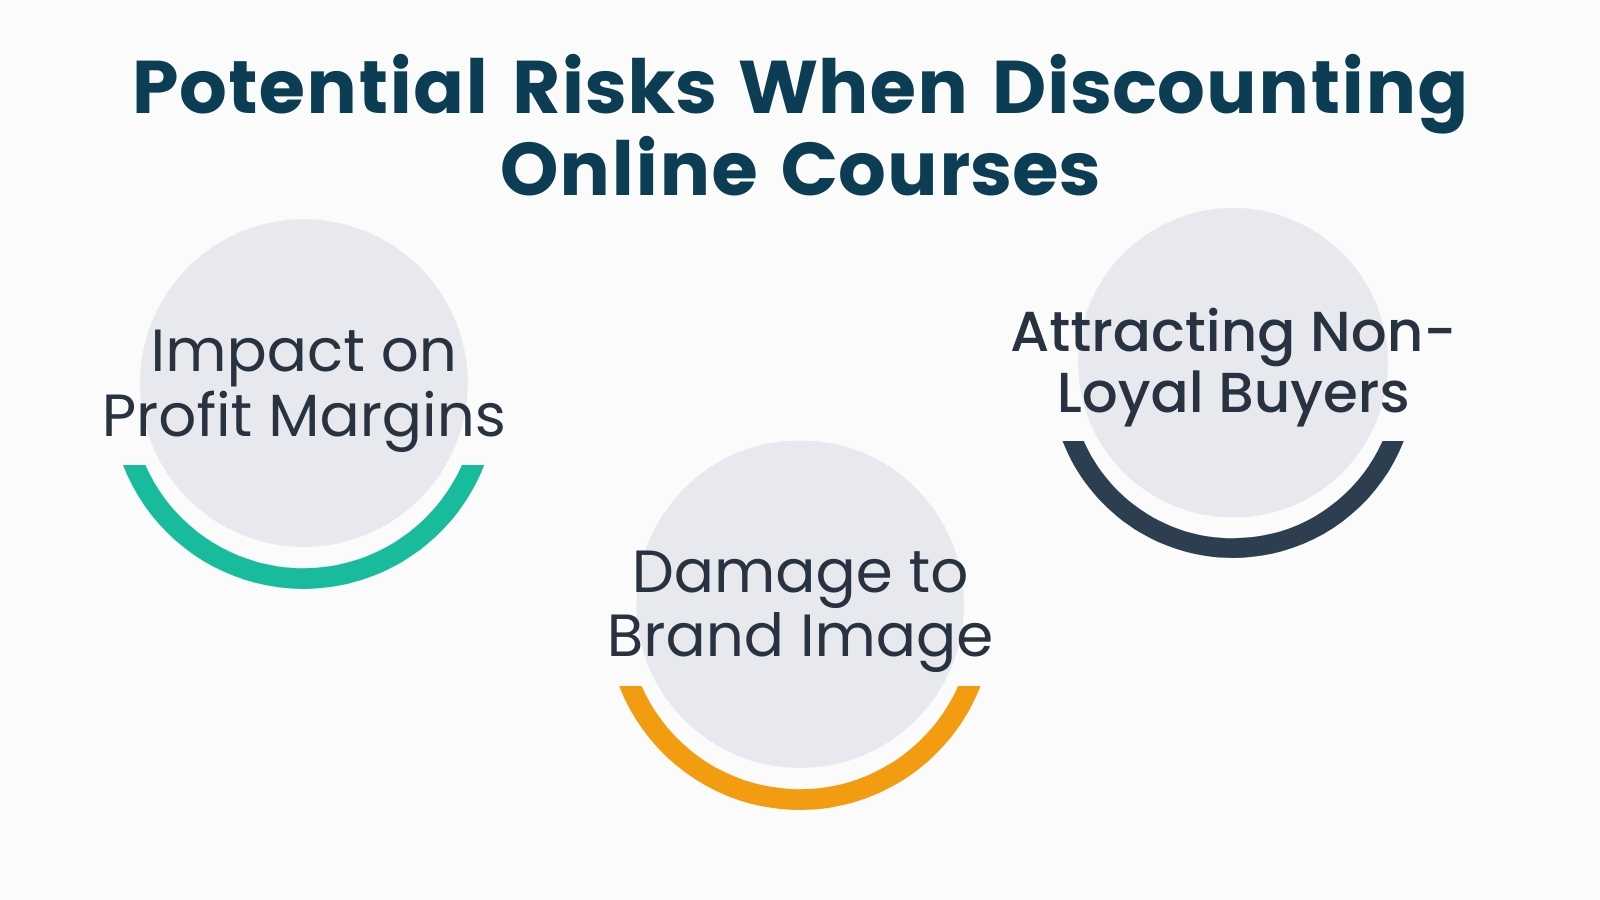 Infographic for Potential Risks When Discounting Online Courses